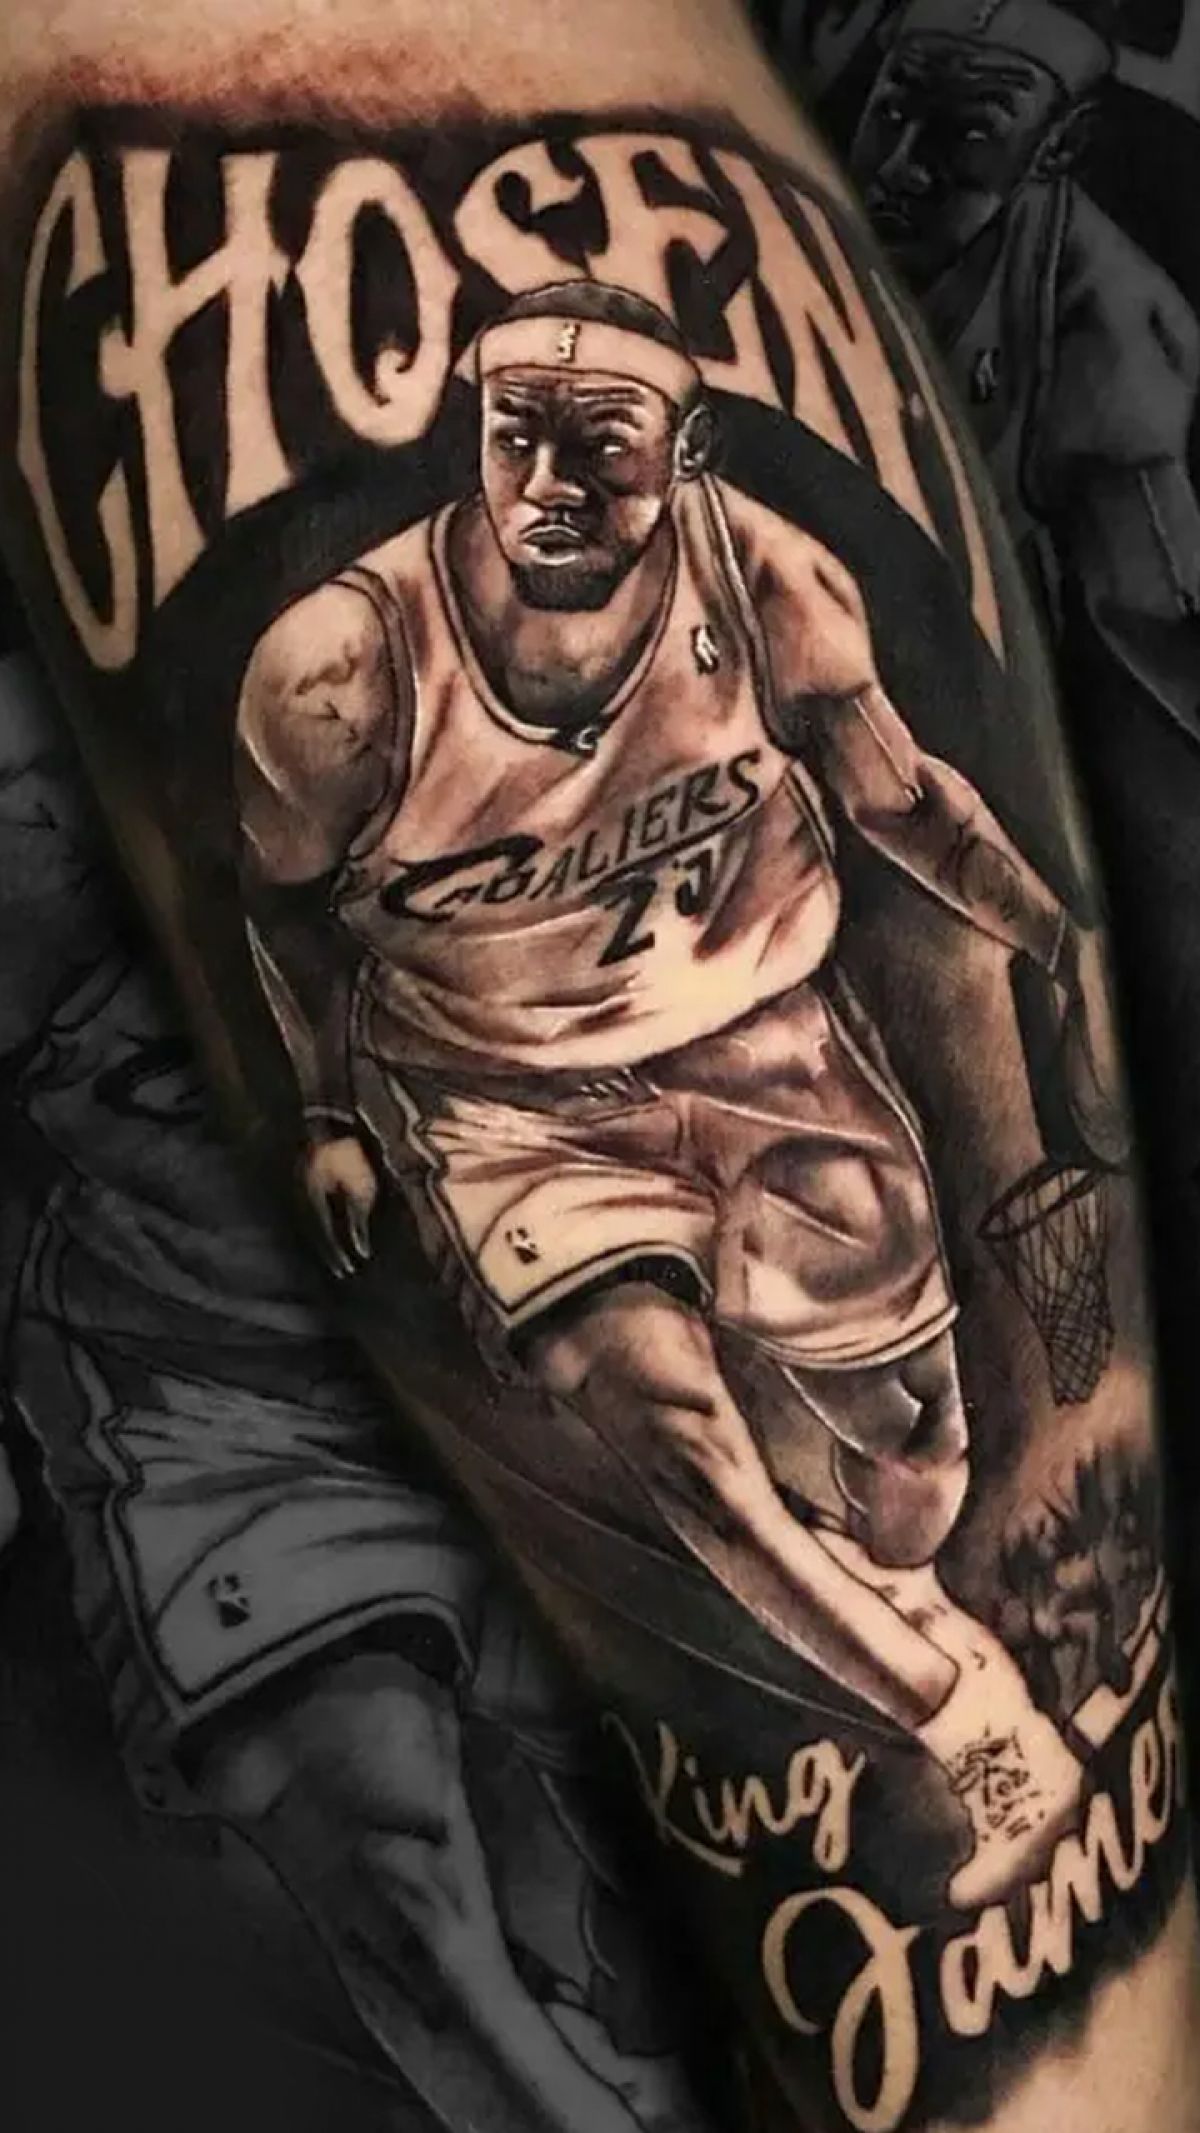 Mr Ink Tattoo & Barber Lounge - Steven Perry Tattoos - Tattoo by Steven,  Lebron James portrait | Facebook